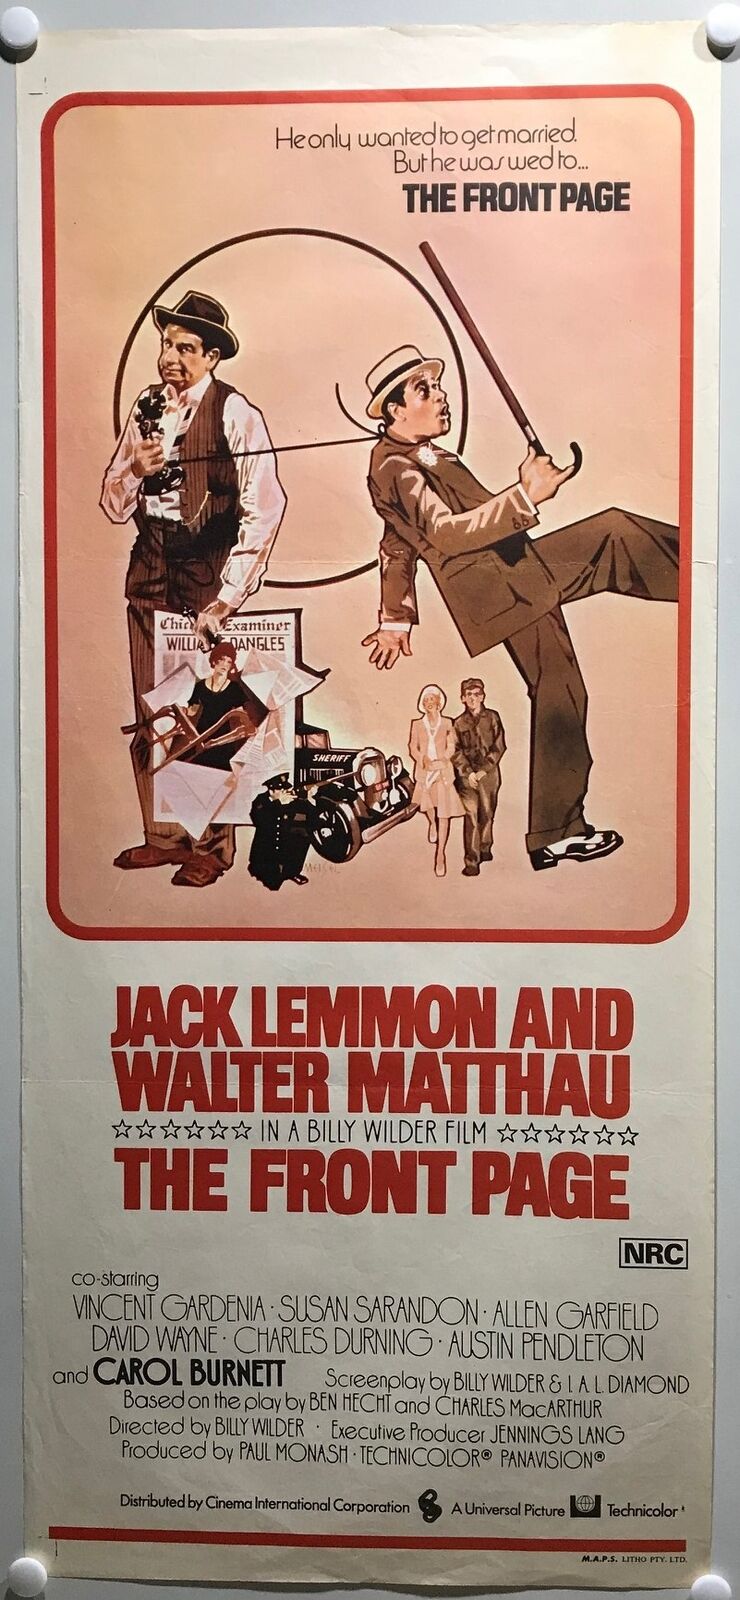 ORIGINAL DAYBILL MOVIE POSTER - THE FRONT PAGE - 1974